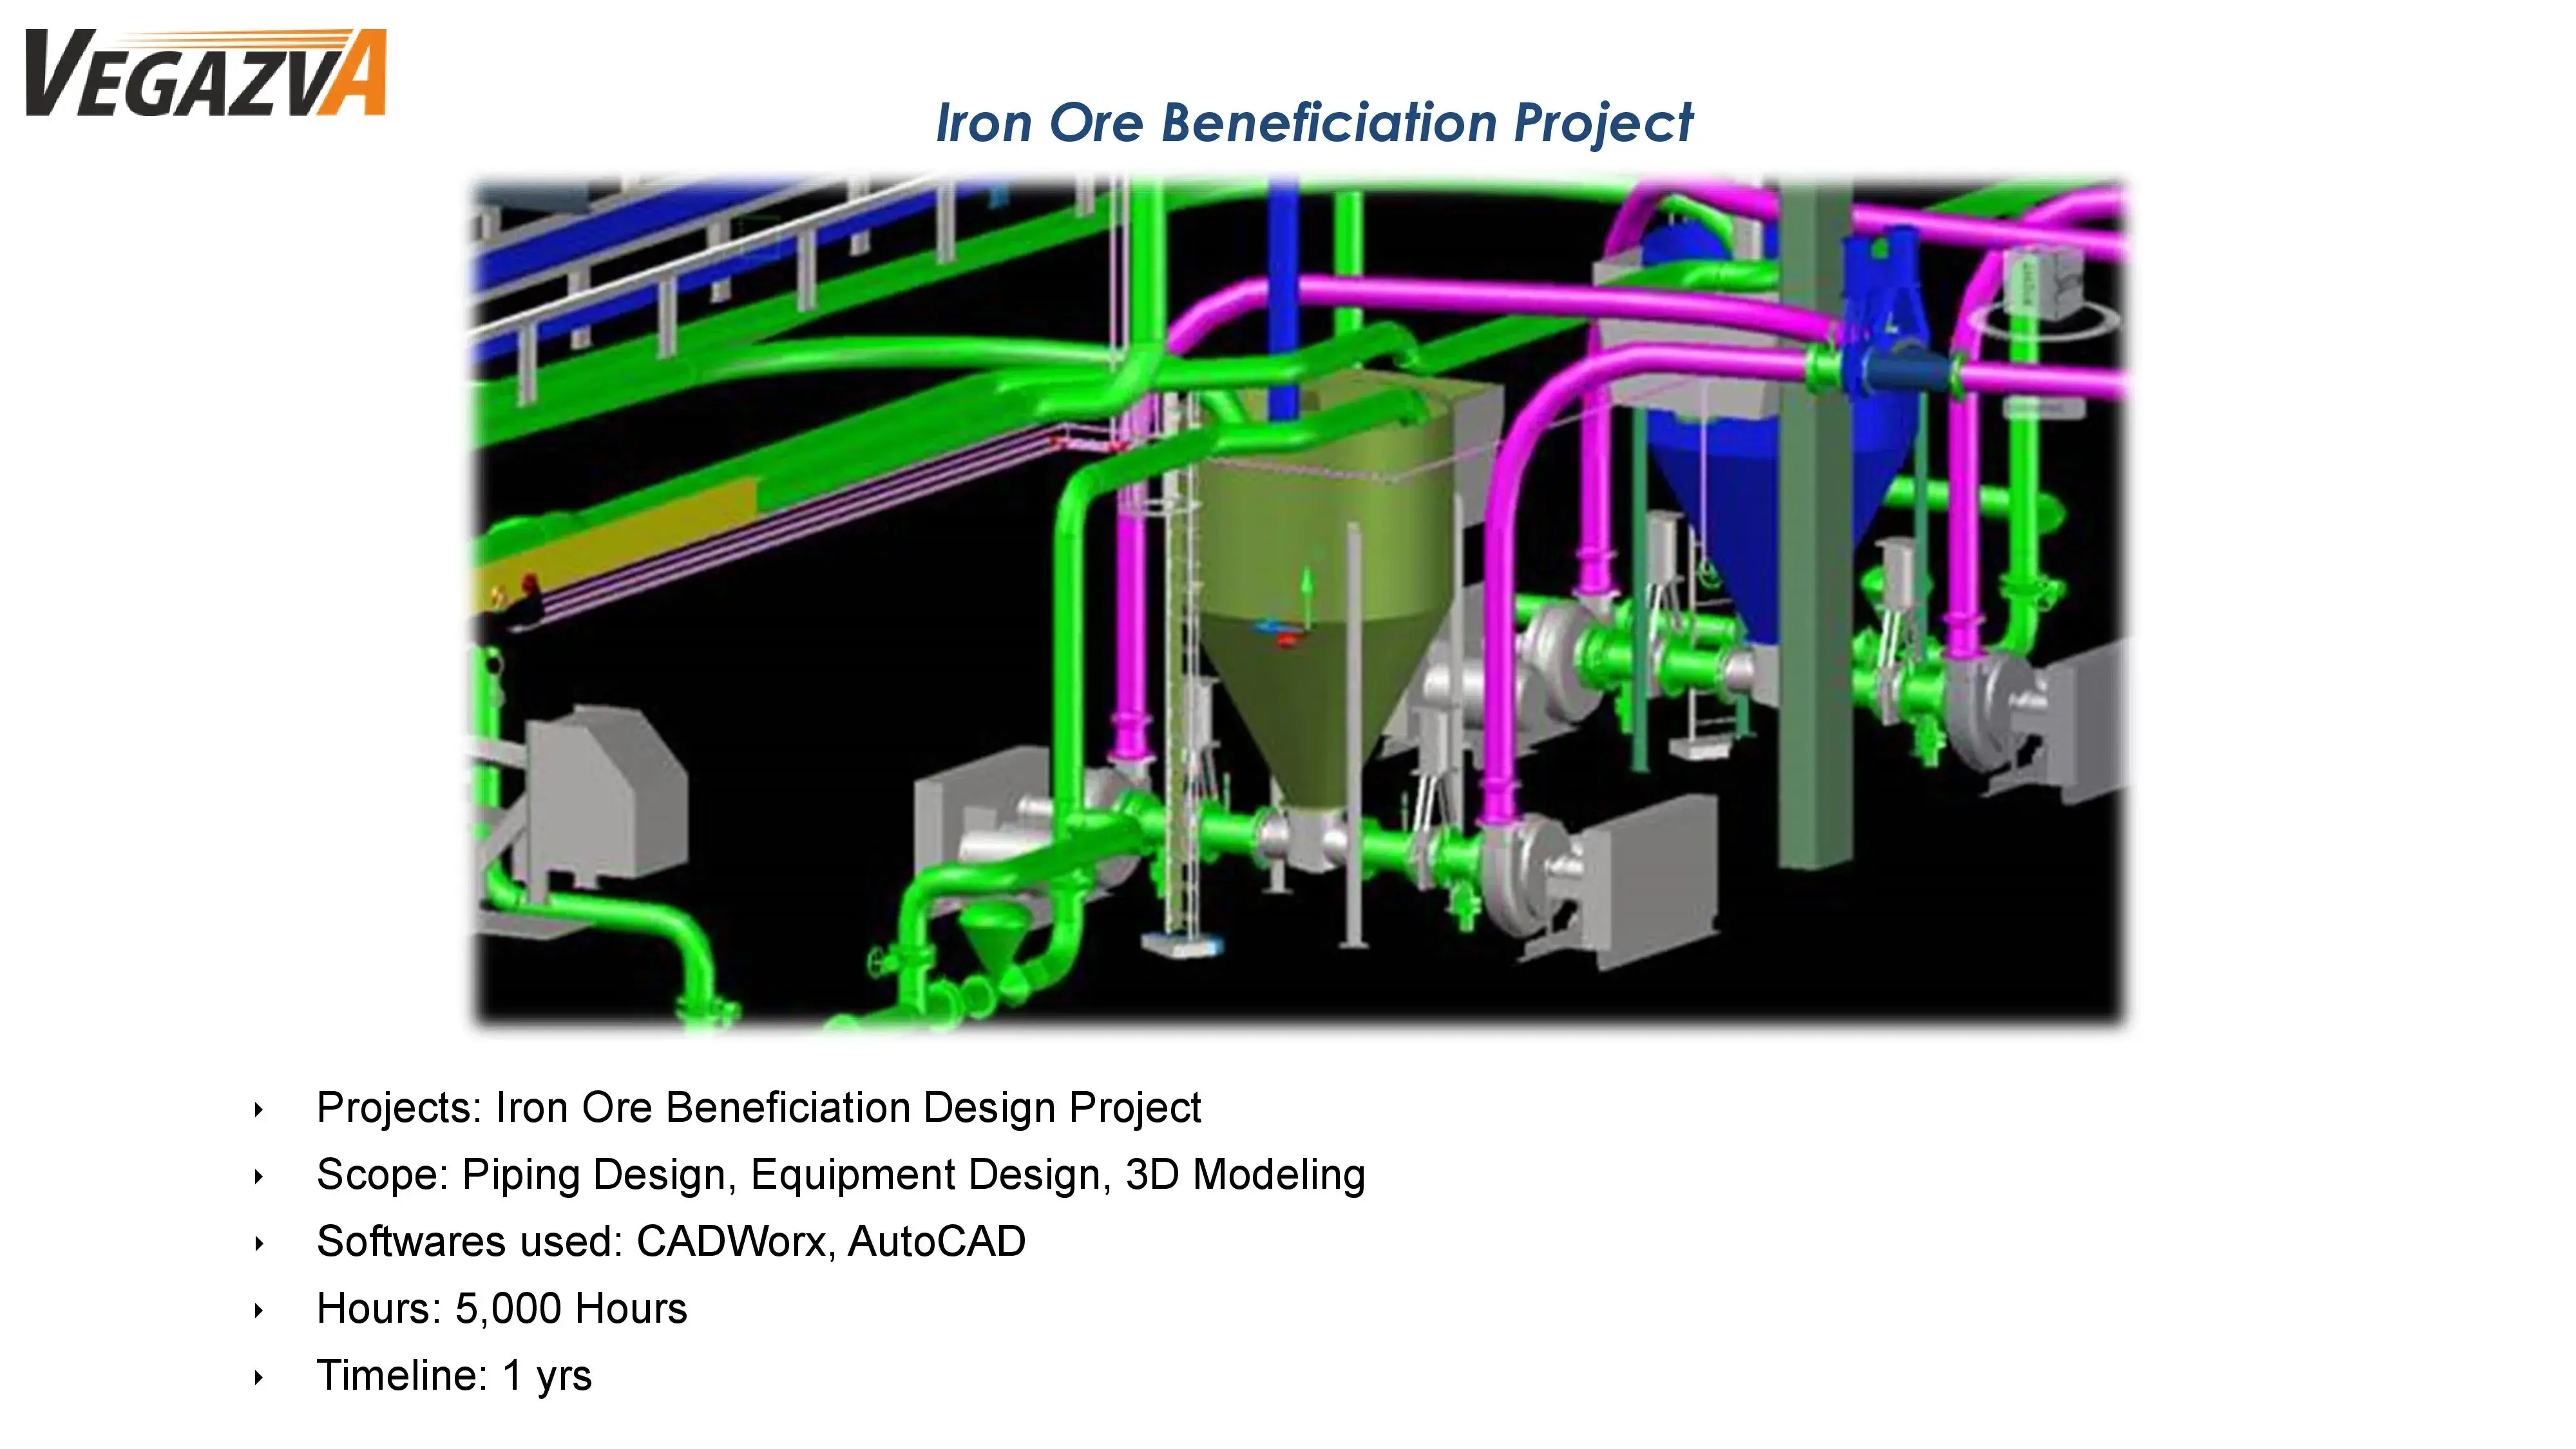 Iron Ore Beneficiation Project